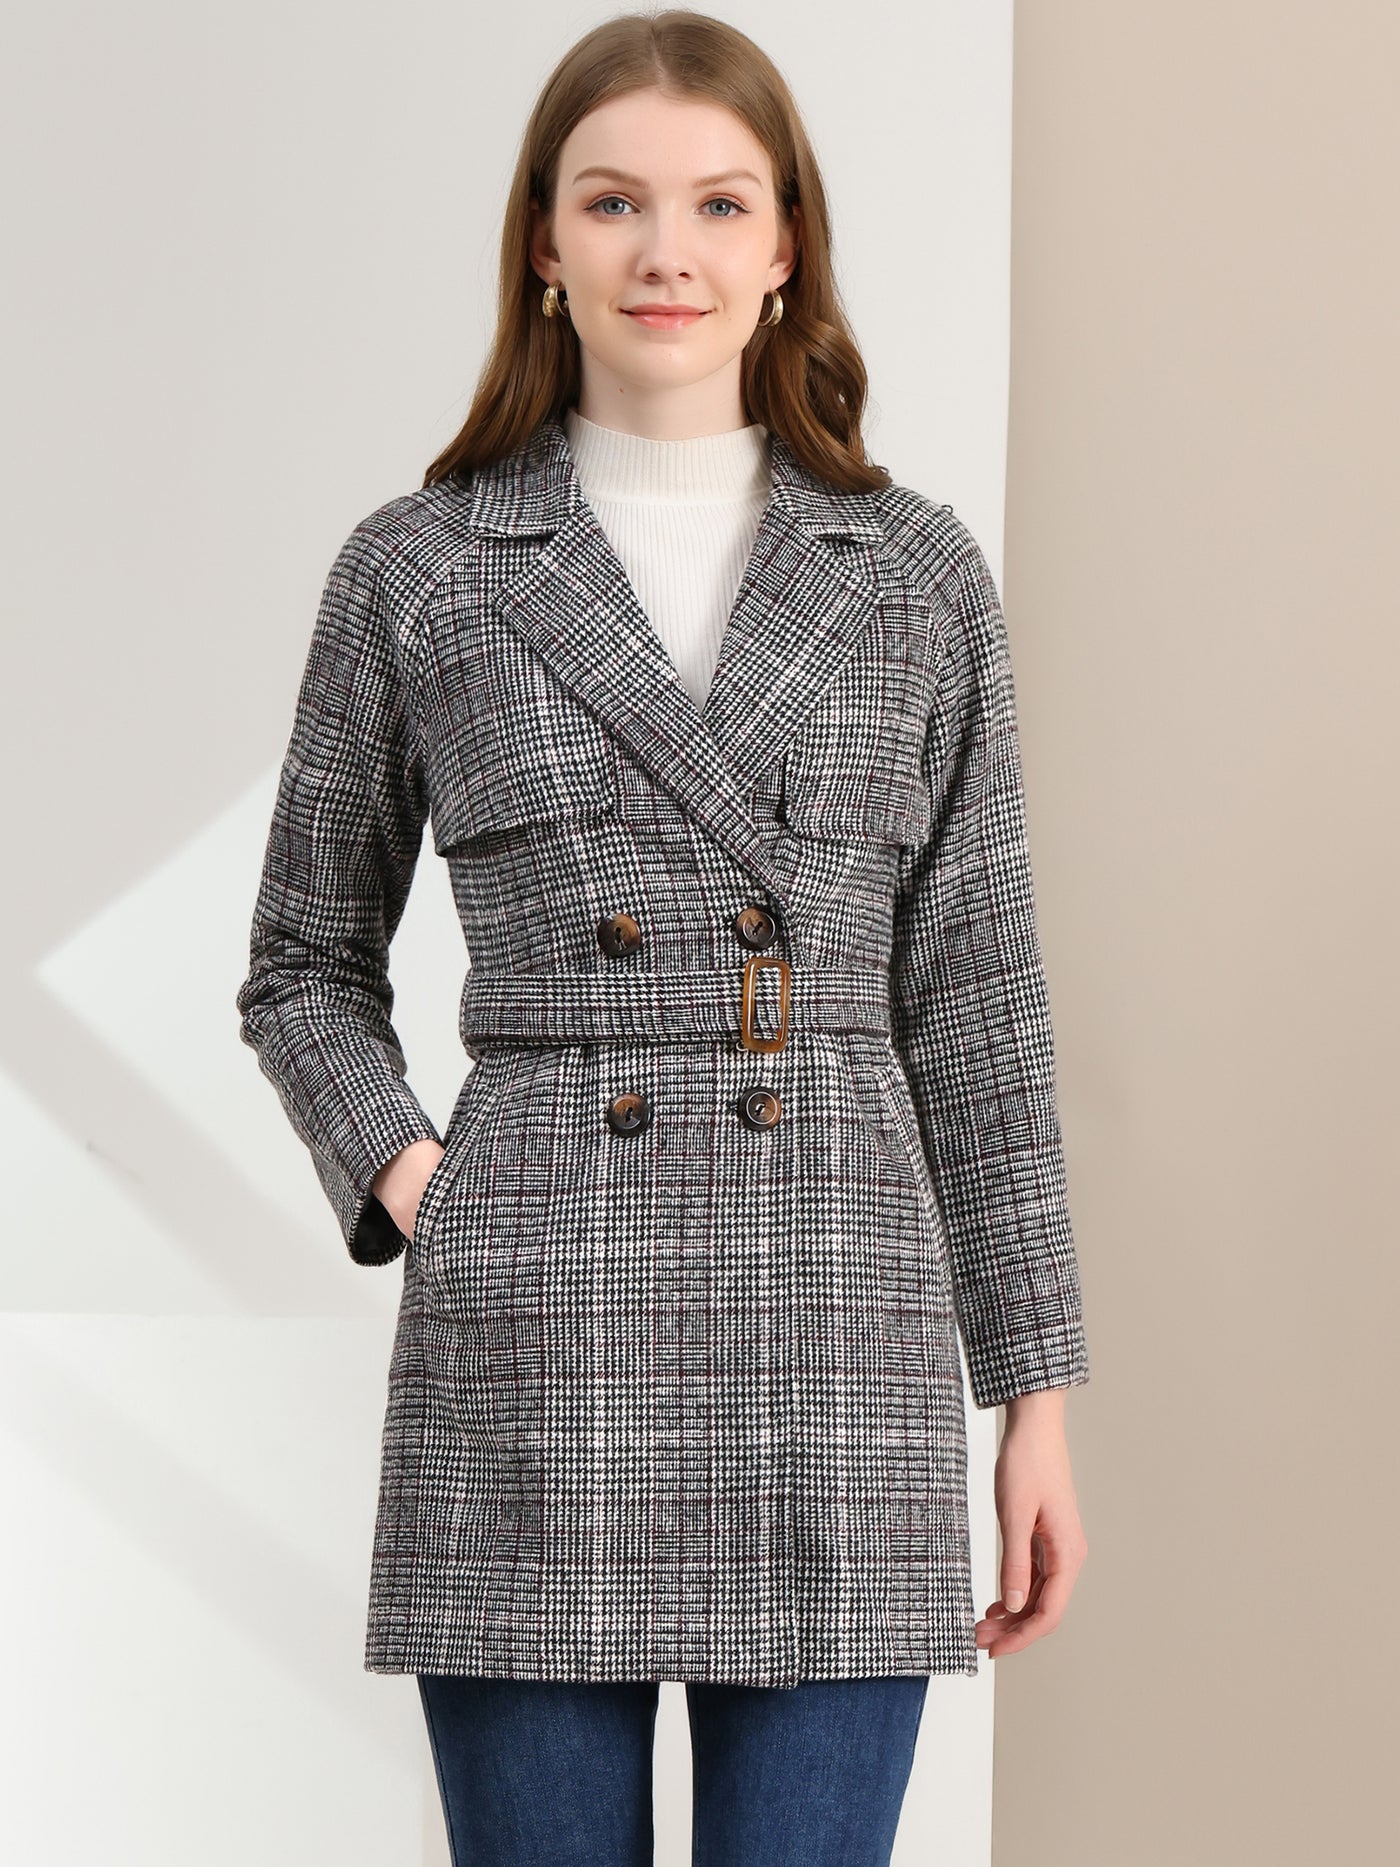 Allegra K Tweed Plaid Notch Lapel Double Breasted Belted Coat with Pockets